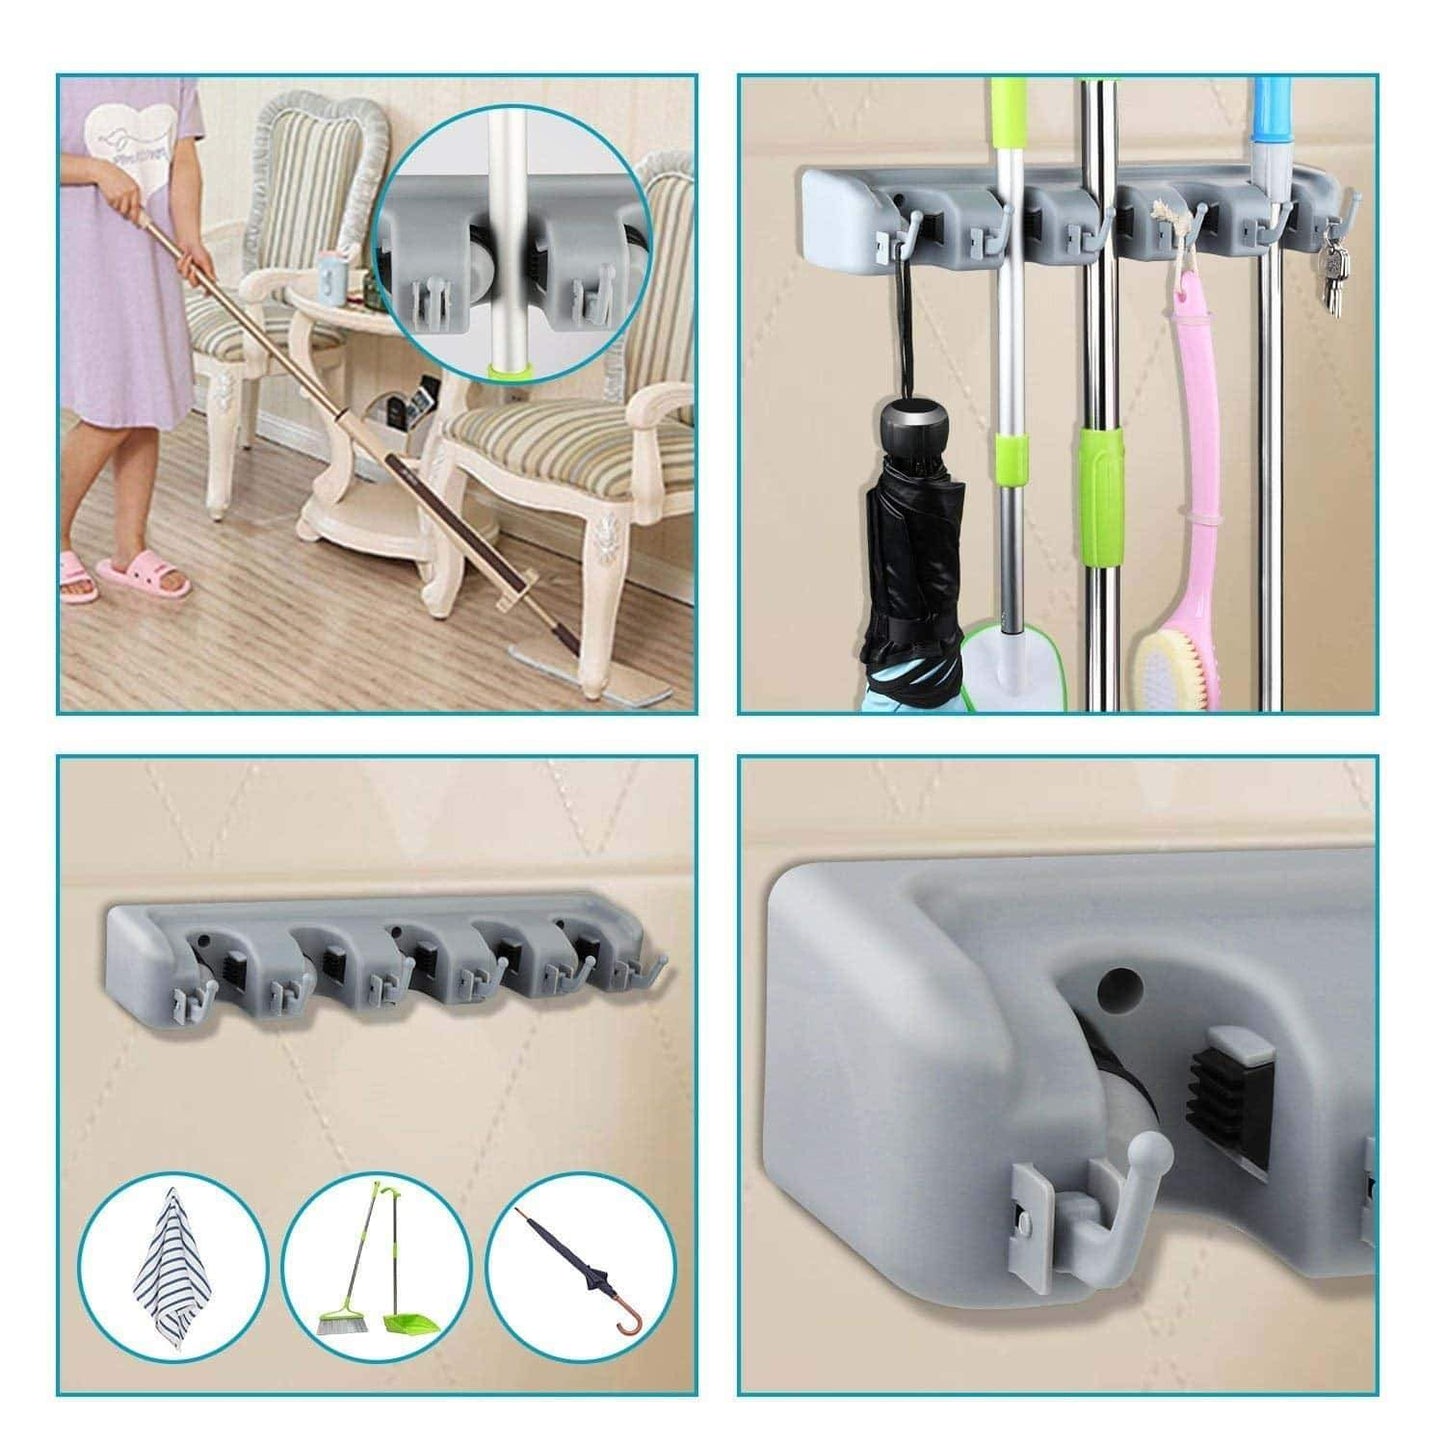 Budget shsycer mop and broom holder wall mounted garden storage rack 5 position with 6 hooks garage holds up to 11 tools for garage garden kitchen laundry offices